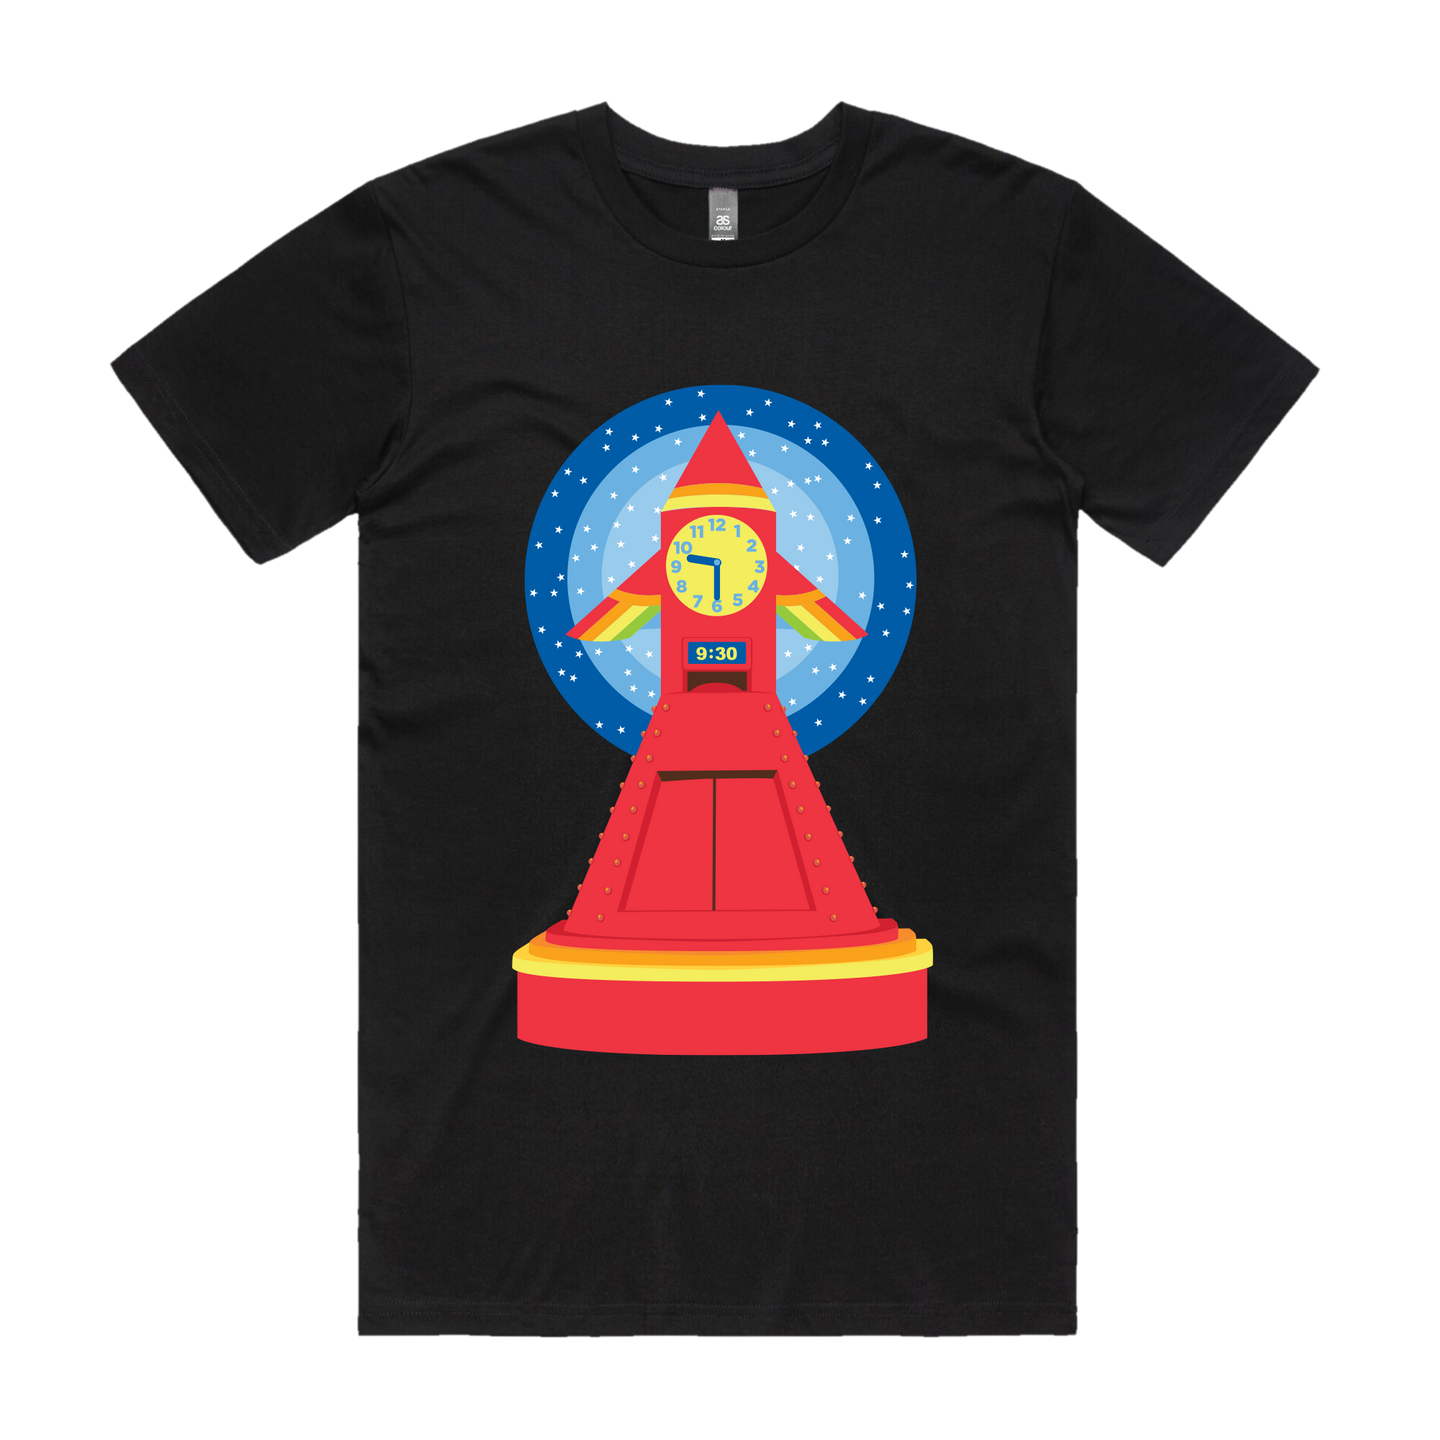 Black Unisex Fit T-Shirt with Play School Rocket Clock Design on Front